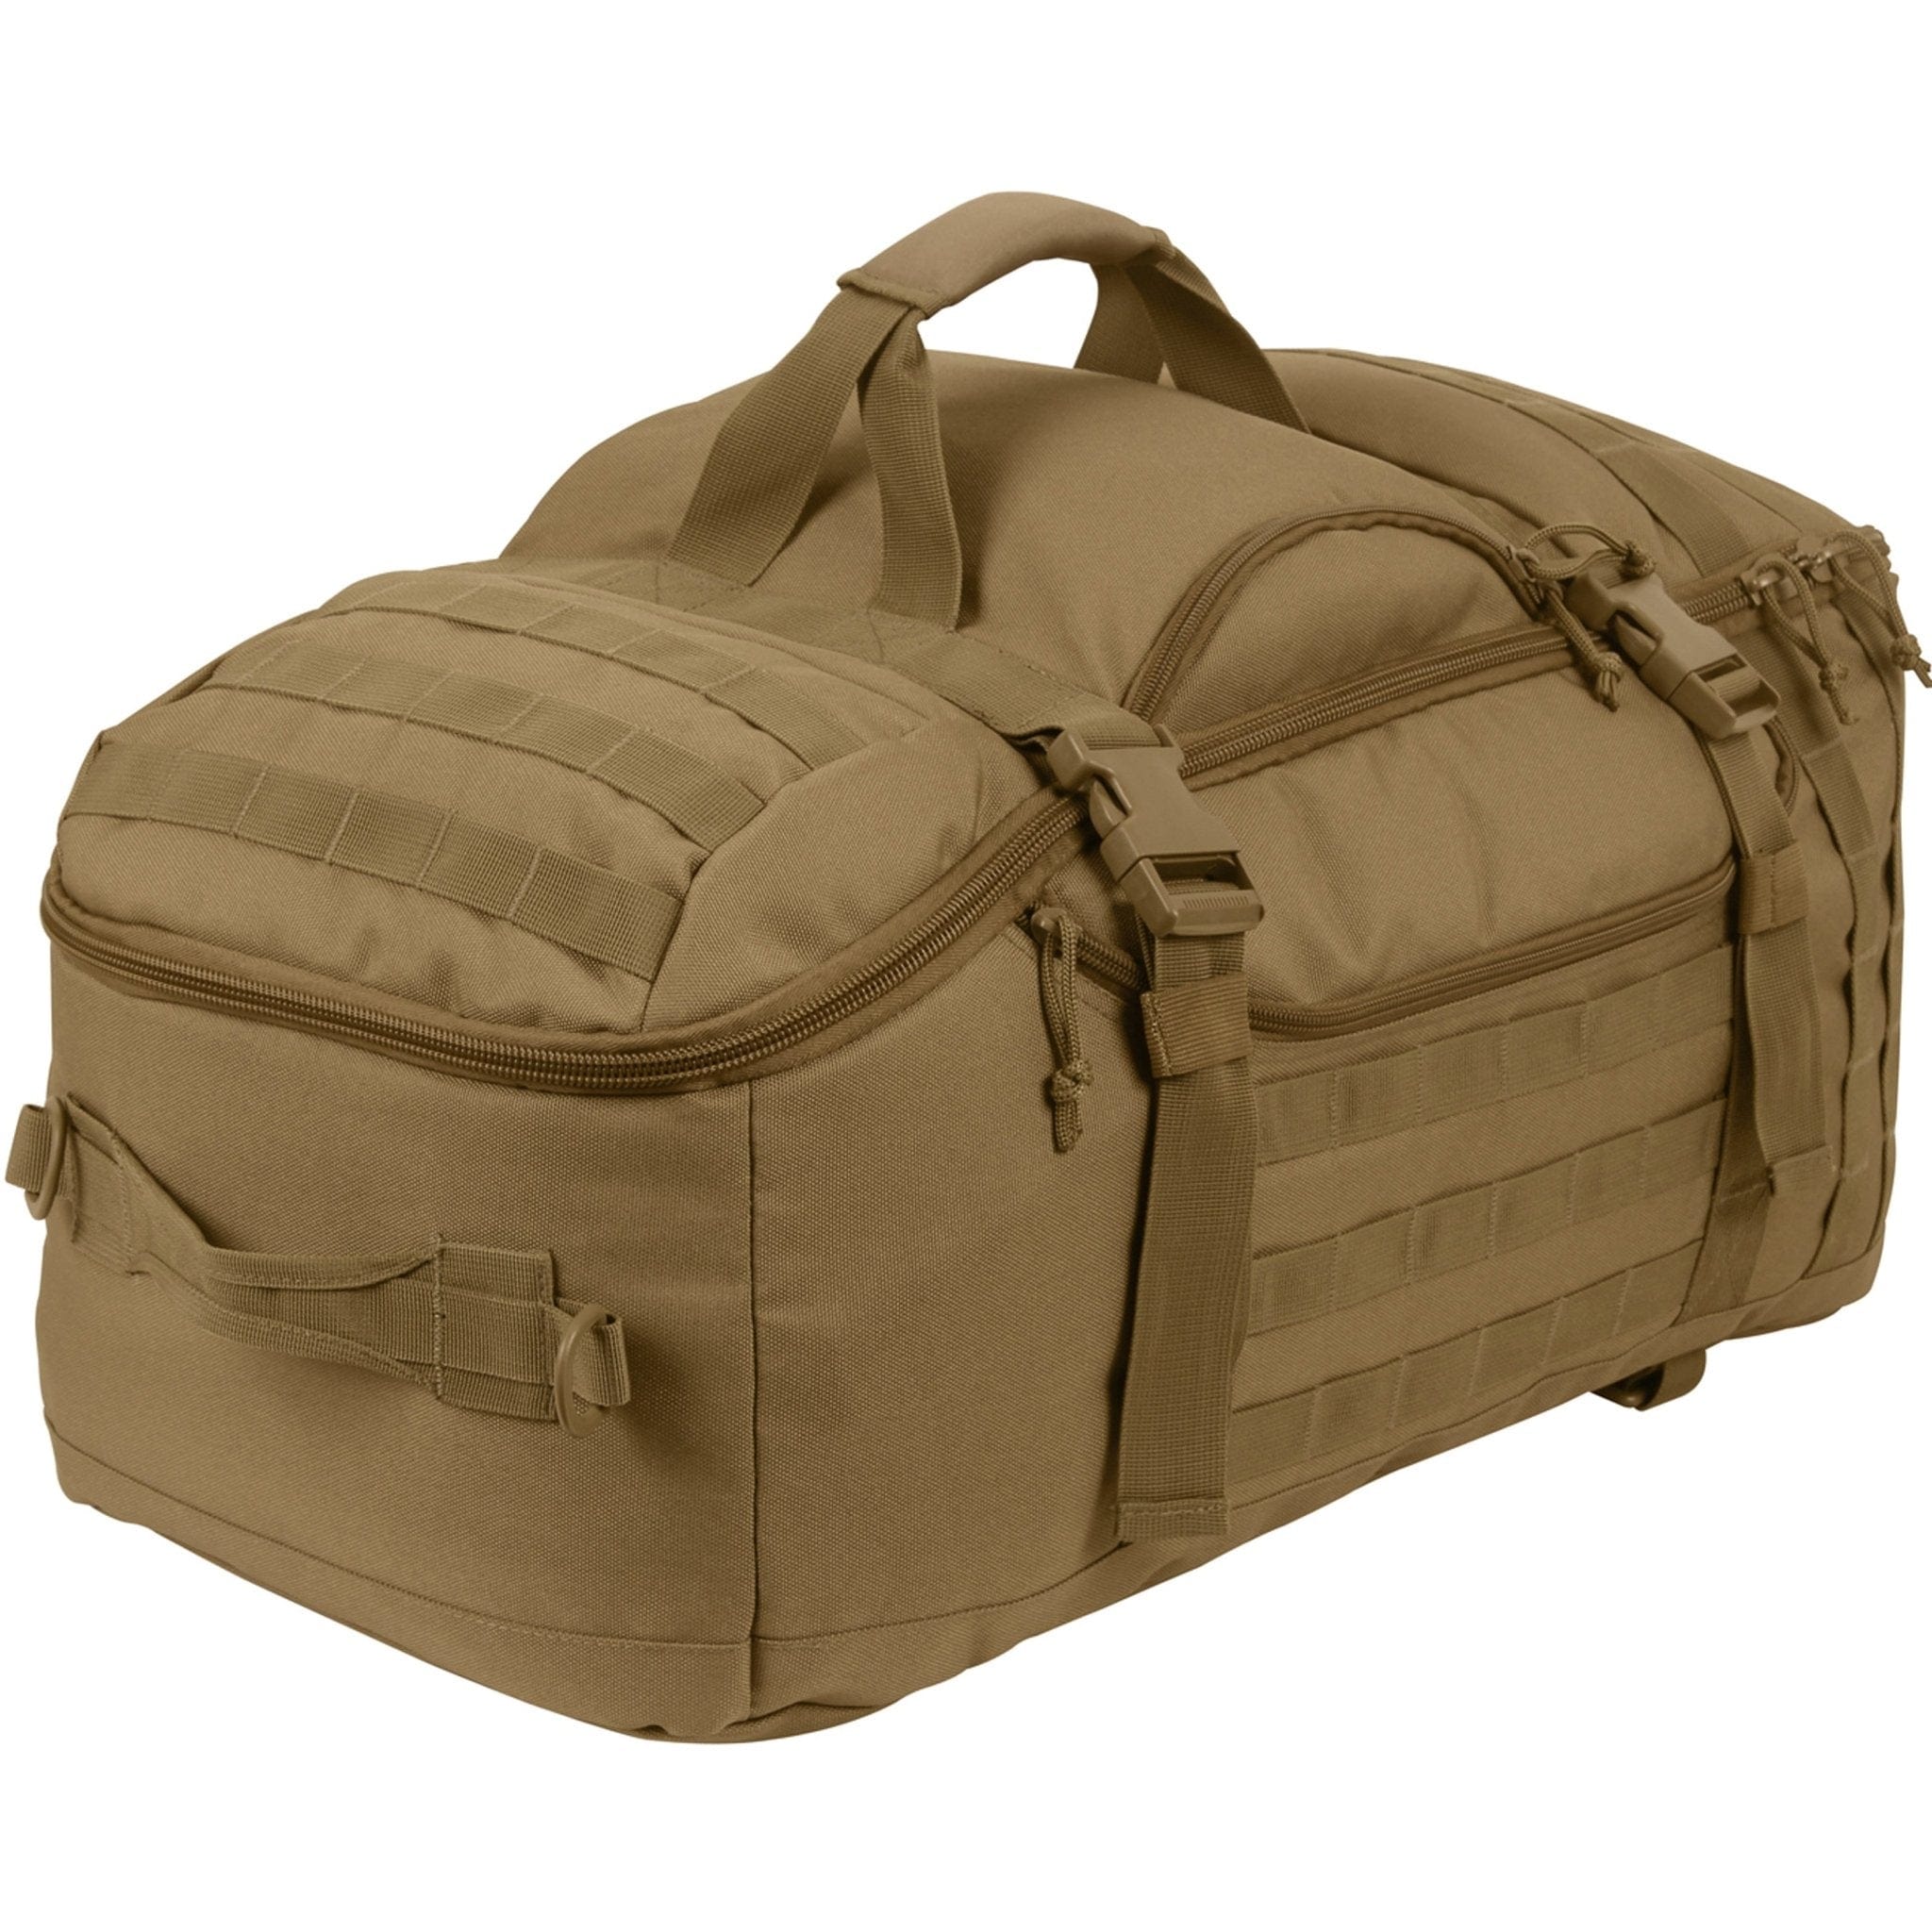 3 in 1 Convertible Mission Bag